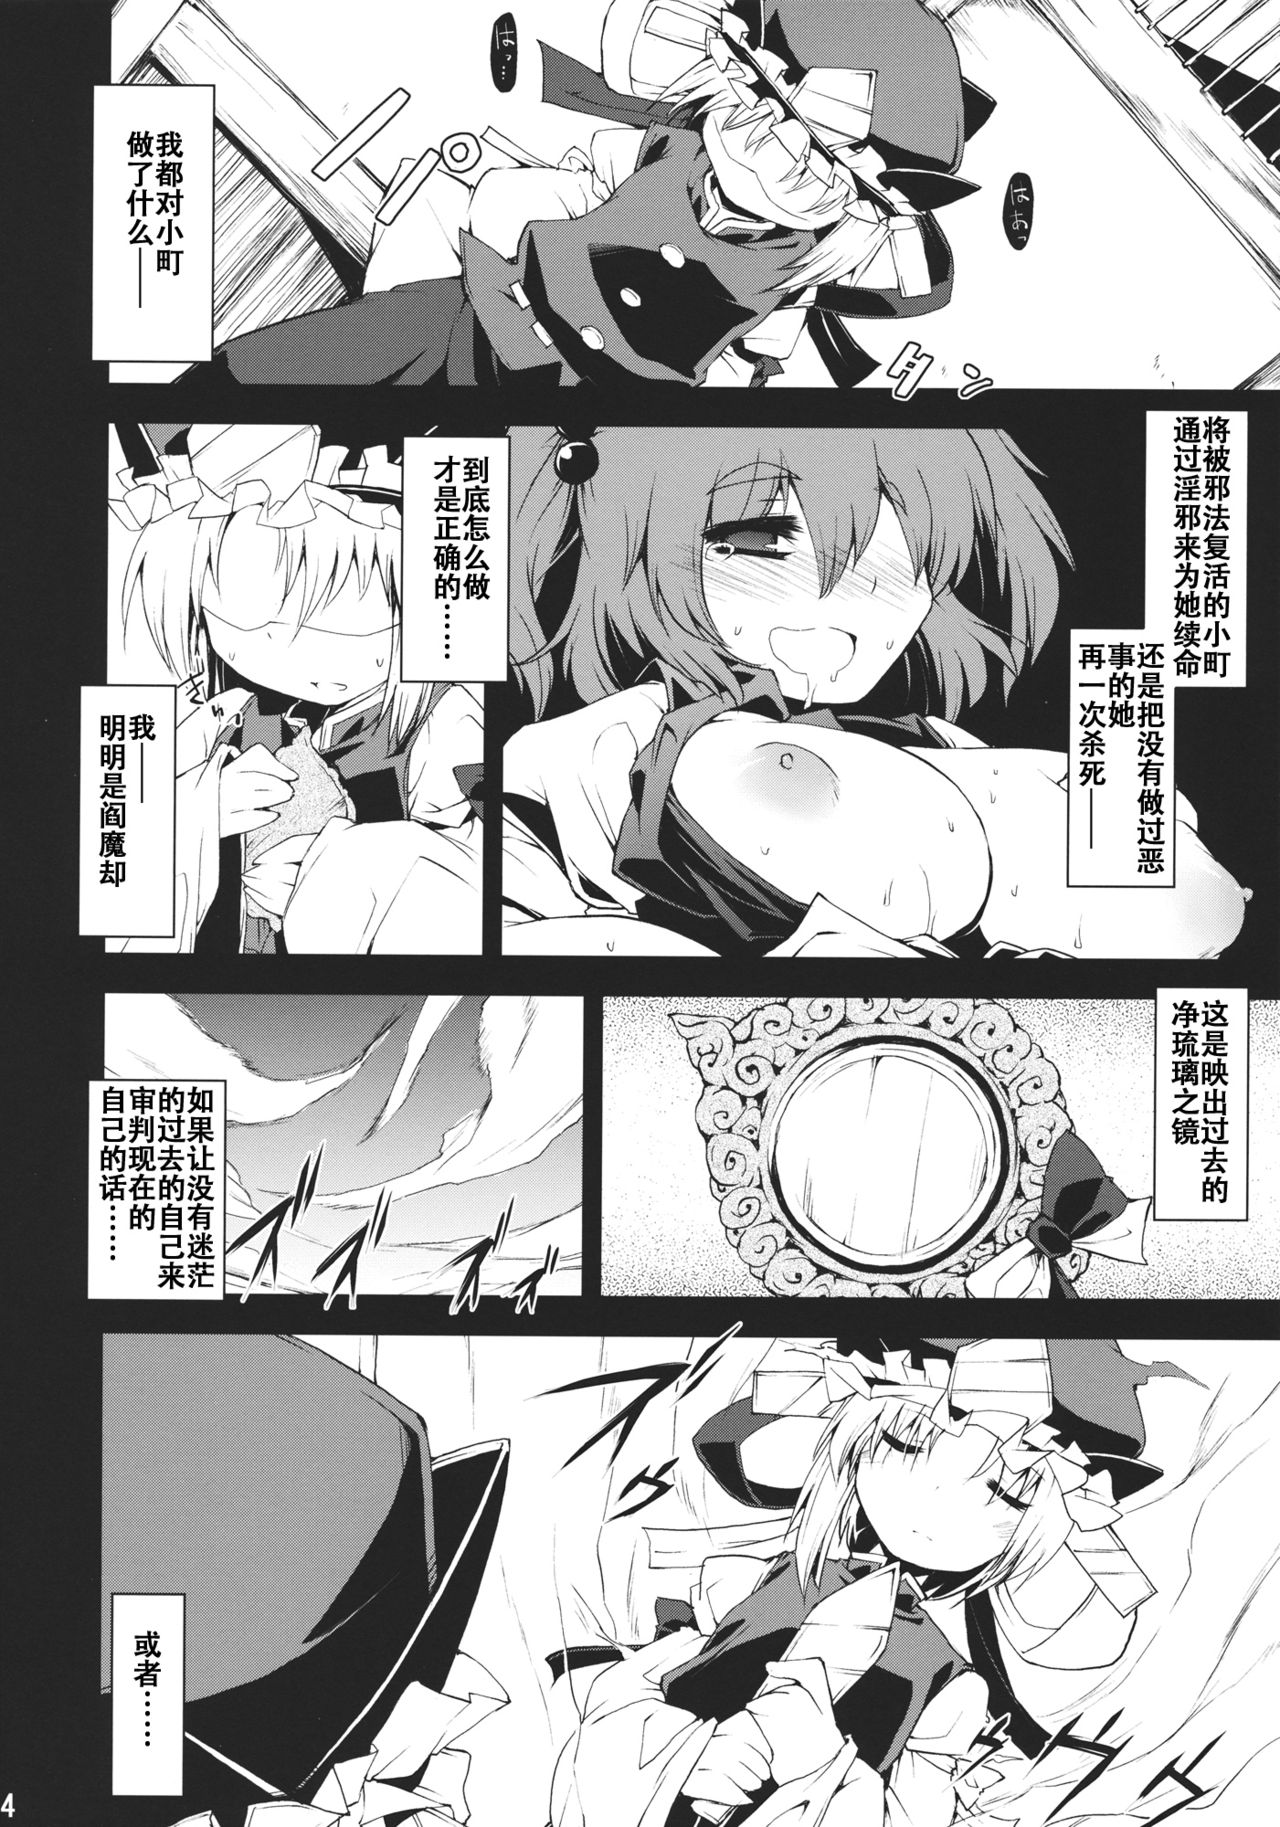 (C78) [Include (Foolest)] Saimin Ihen 5 ~Blind Justice~ (Touhou Project) [Chinese] [靴下汉化组] (C78) [IncluDe (ふぅりすと)] 催眠異変 伍 ~Blind Justice~ (東方Project) [中国翻訳]